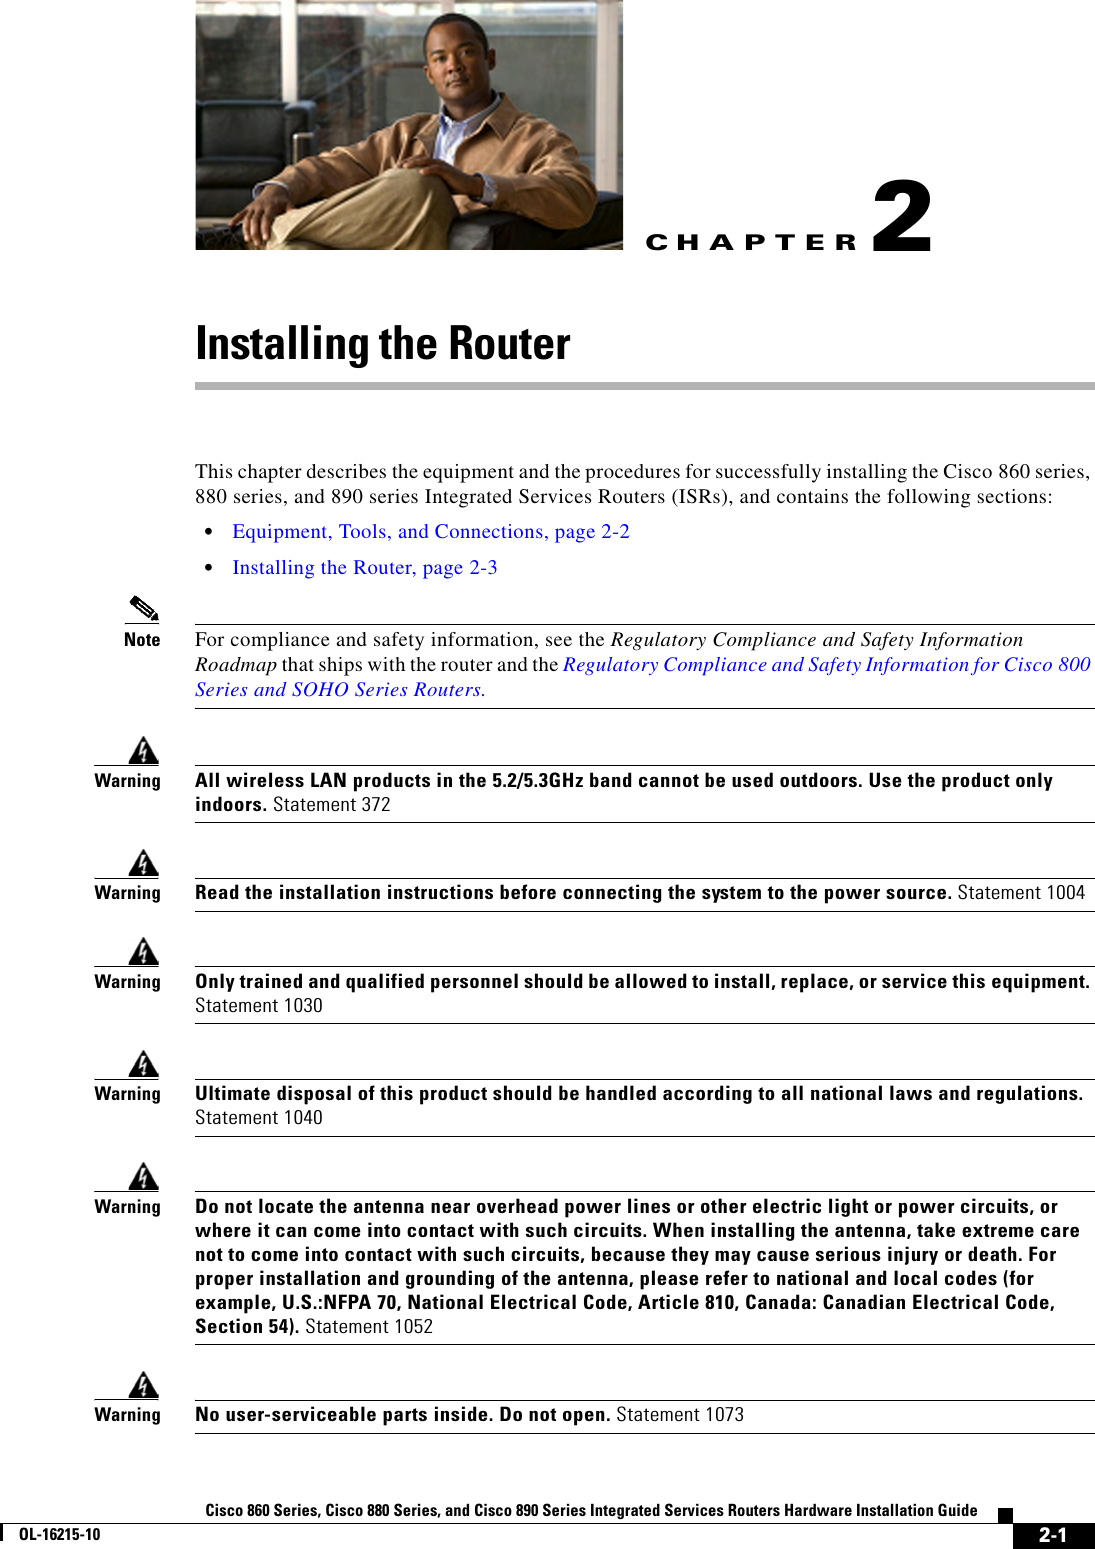 CHAPTER 2-1Cisco 860 Series, Cisco 880 Series, and Cisco 890 Series Integrated Services Routers Hardware Installation GuideOL-16215-102Installing the RouterThis chapter describes the equipment and the procedures for successfully installing the Cisco 860 series, 880 series, and 890 series Integrated Services Routers (ISRs), and contains the following sections:  • Equipment, Tools, and Connections, page 2-2  • Installing the Router, page 2-3Note For compliance and safety information, see the Regulatory Compliance and Safety Information Roadmap that ships with the router and the Regulatory Compliance and Safety Information for Cisco 800 Series and SOHO Series Routers.WarningAll wireless LAN products in the 5.2/5.3GHz band cannot be used outdoors. Use the product only indoors. Statement 372WarningRead the installation instructions before connecting the system to the power source. Statement 1004WarningOnly trained and qualified personnel should be allowed to install, replace, or service this equipment. Statement 1030WarningUltimate disposal of this product should be handled according to all national laws and regulations. Statement 1040WarningDo not locate the antenna near overhead power lines or other electric light or power circuits, or where it can come into contact with such circuits. When installing the antenna, take extreme care not to come into contact with such circuits, because they may cause serious injury or death. For proper installation and grounding of the antenna, please refer to national and local codes (for example, U.S.:NFPA 70, National Electrical Code, Article 810, Canada: Canadian Electrical Code, Section 54). Statement 1052WarningNo user-serviceable parts inside. Do not open. Statement 1073